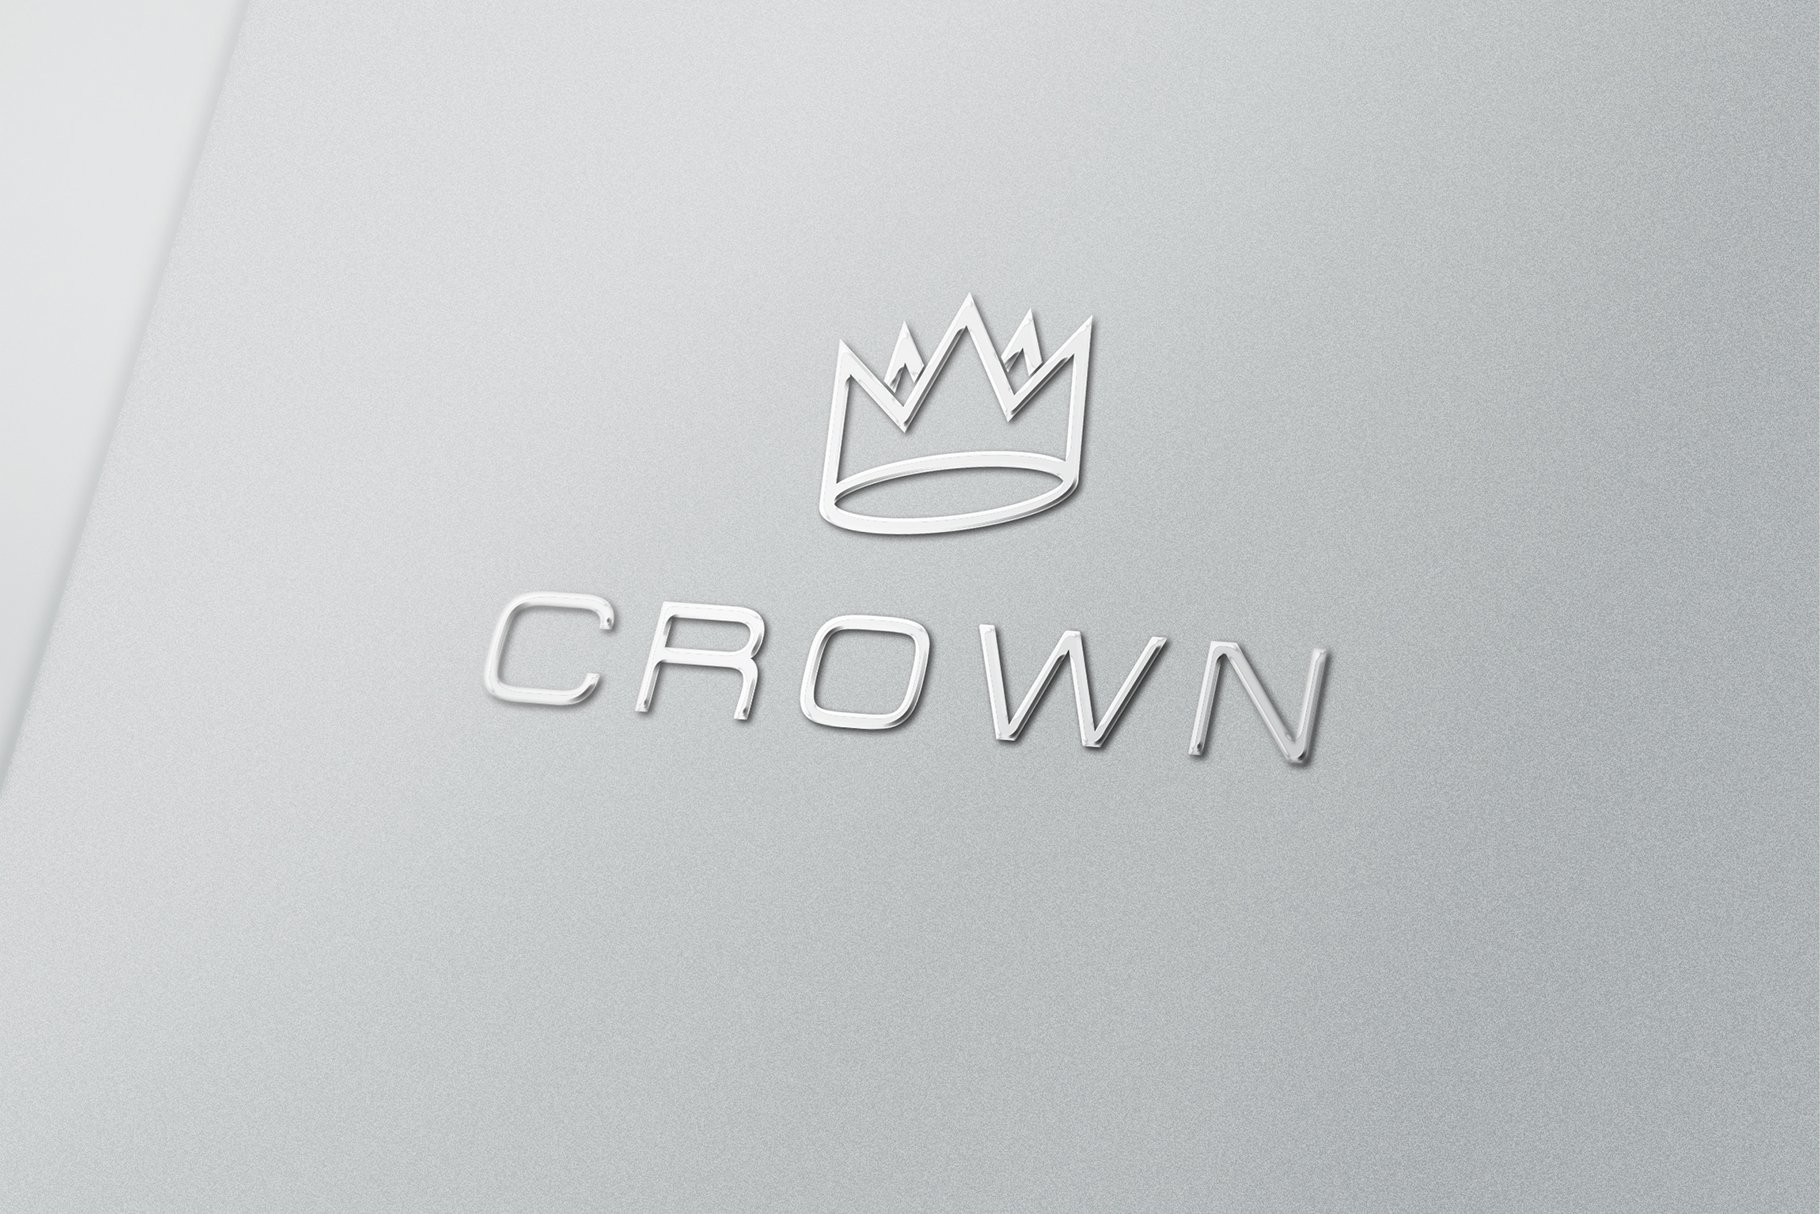 Silver crown for logo.